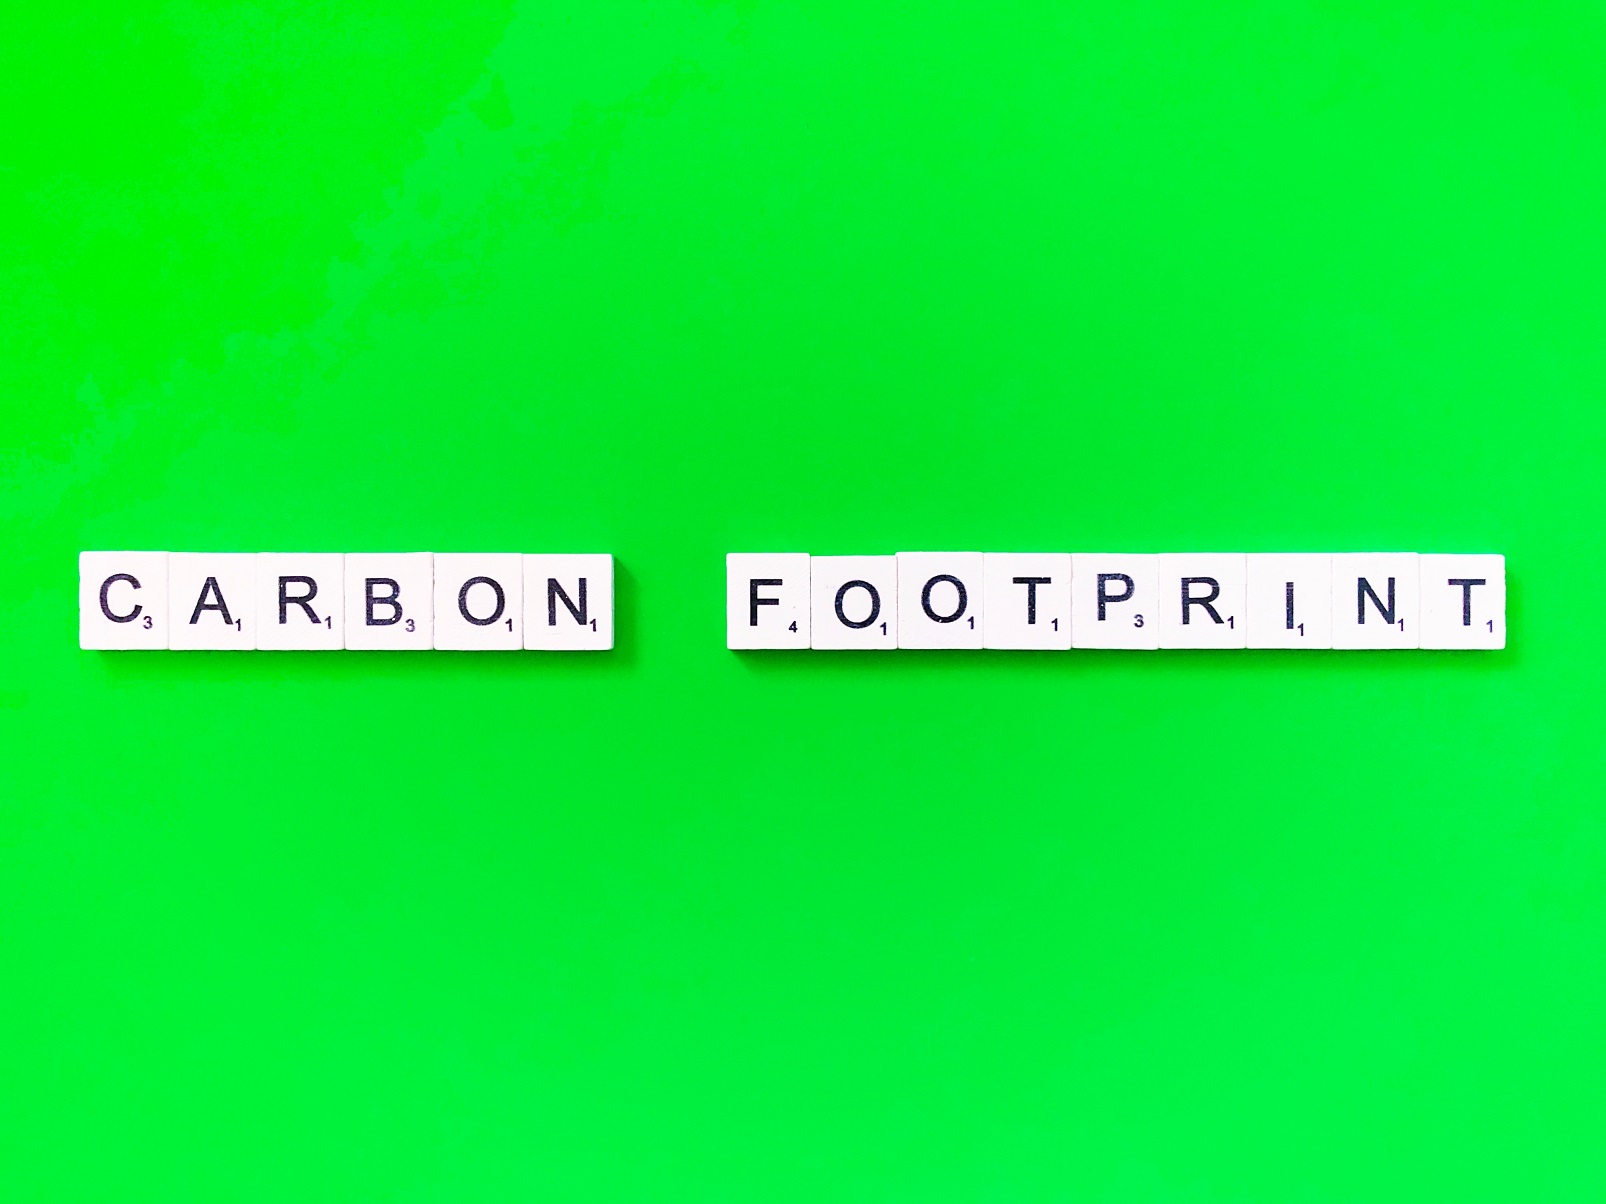 Carbon Footprints – who’s doing them and why?